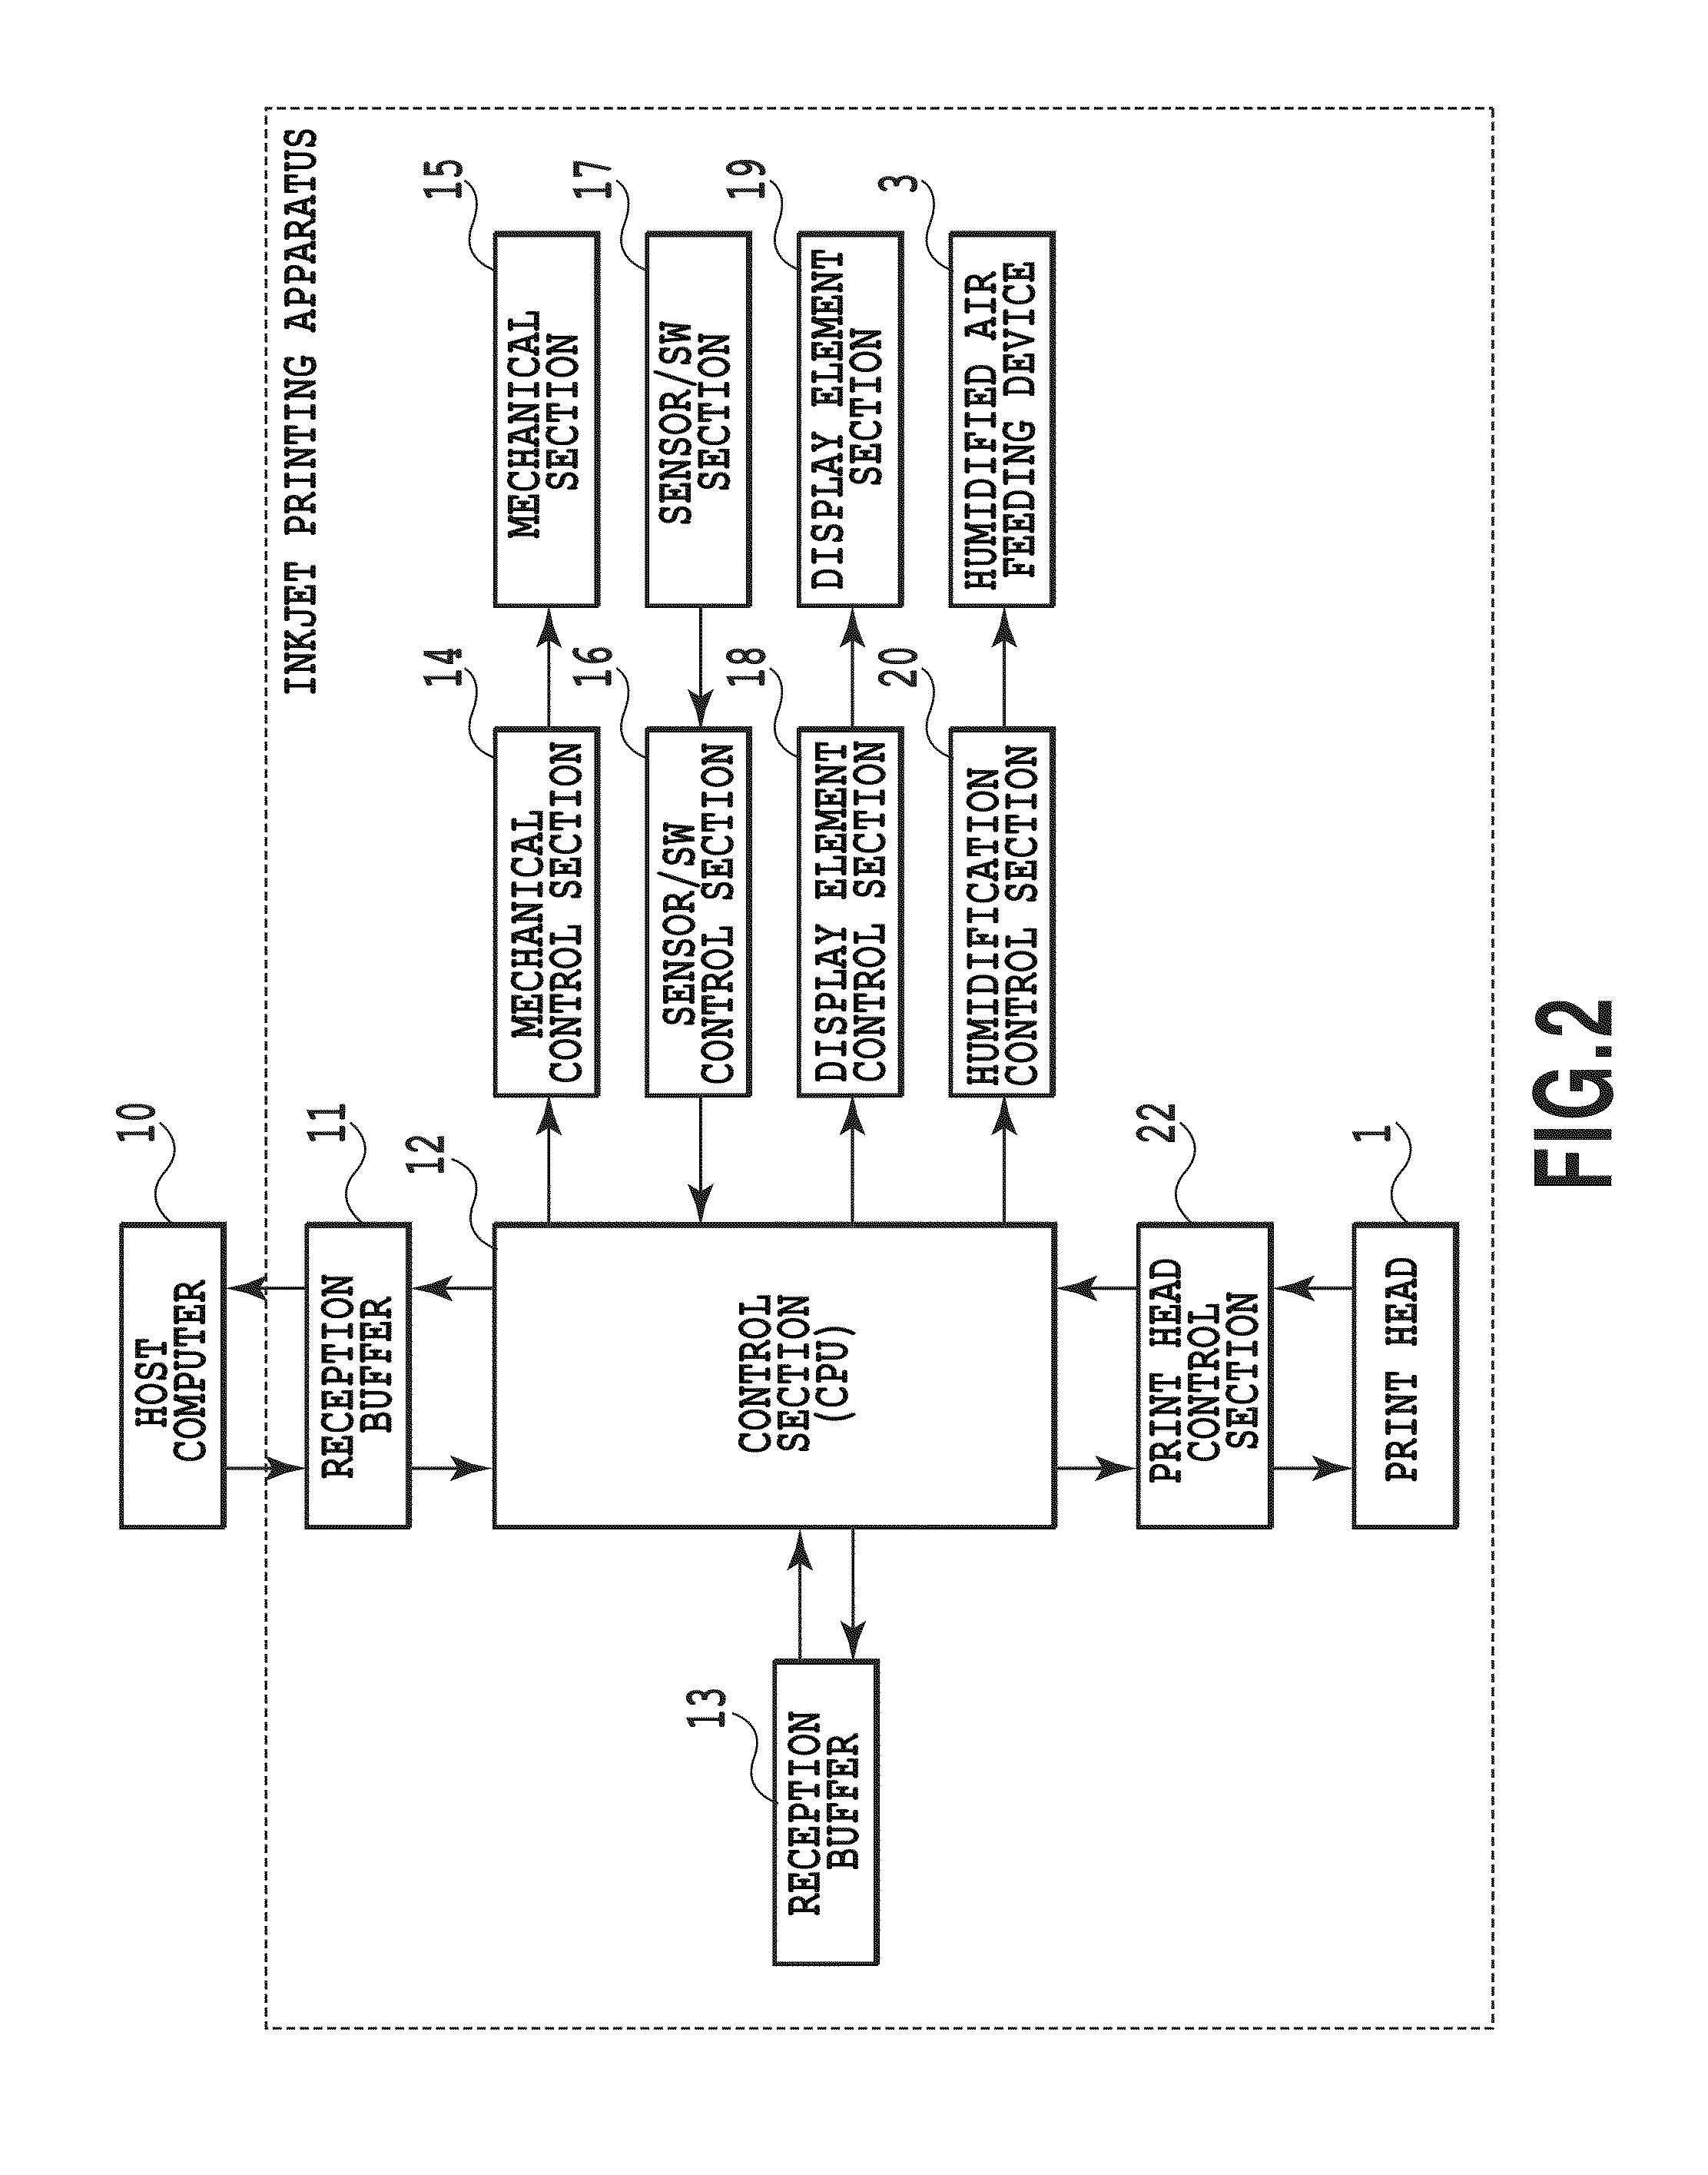 Inkjet printing apparatus with humidification unit